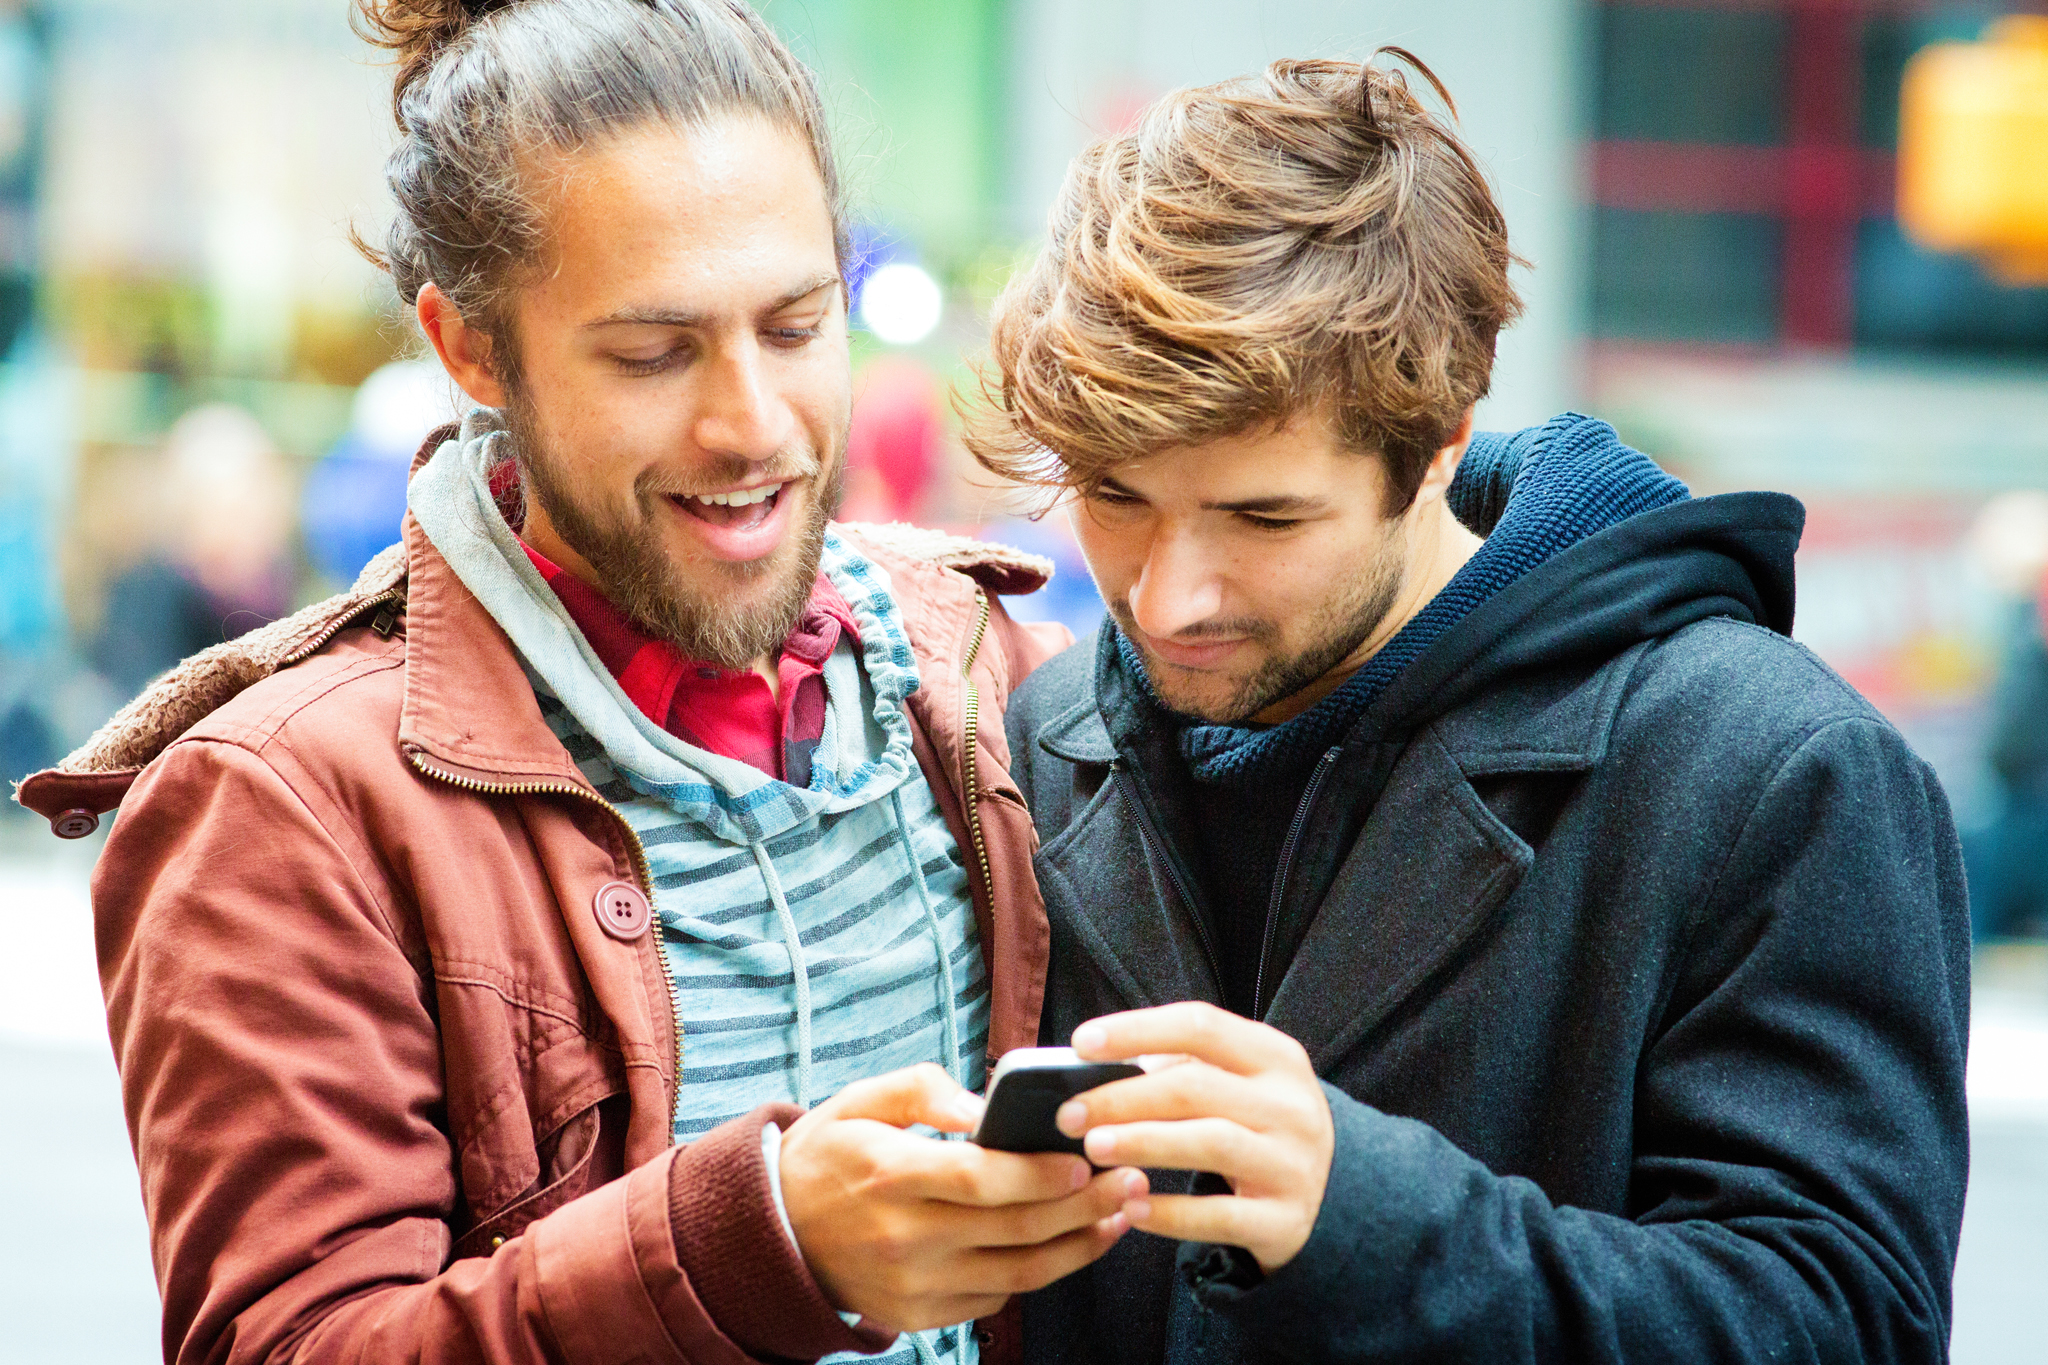 Young man sharing media with friend on mobile phone. Close-up version; they are both smiling.